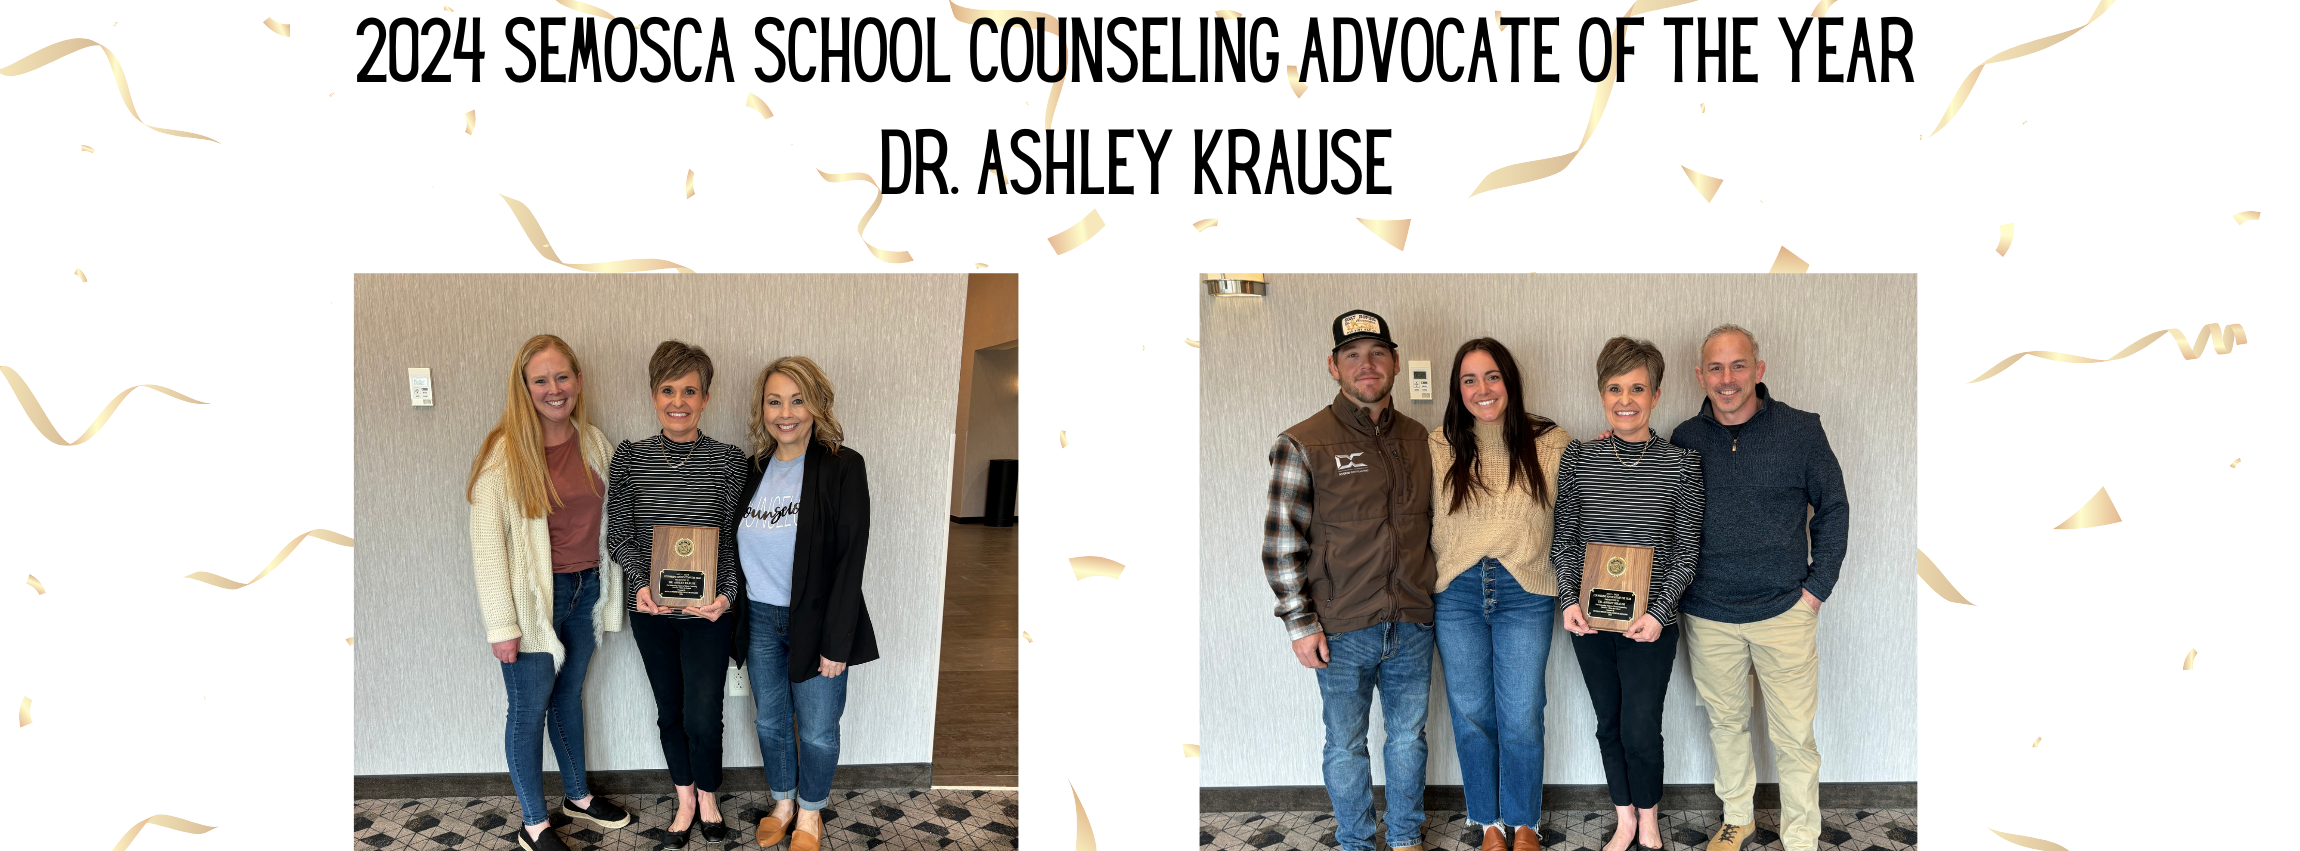 Dr. Ashley Krause with counselors and her family